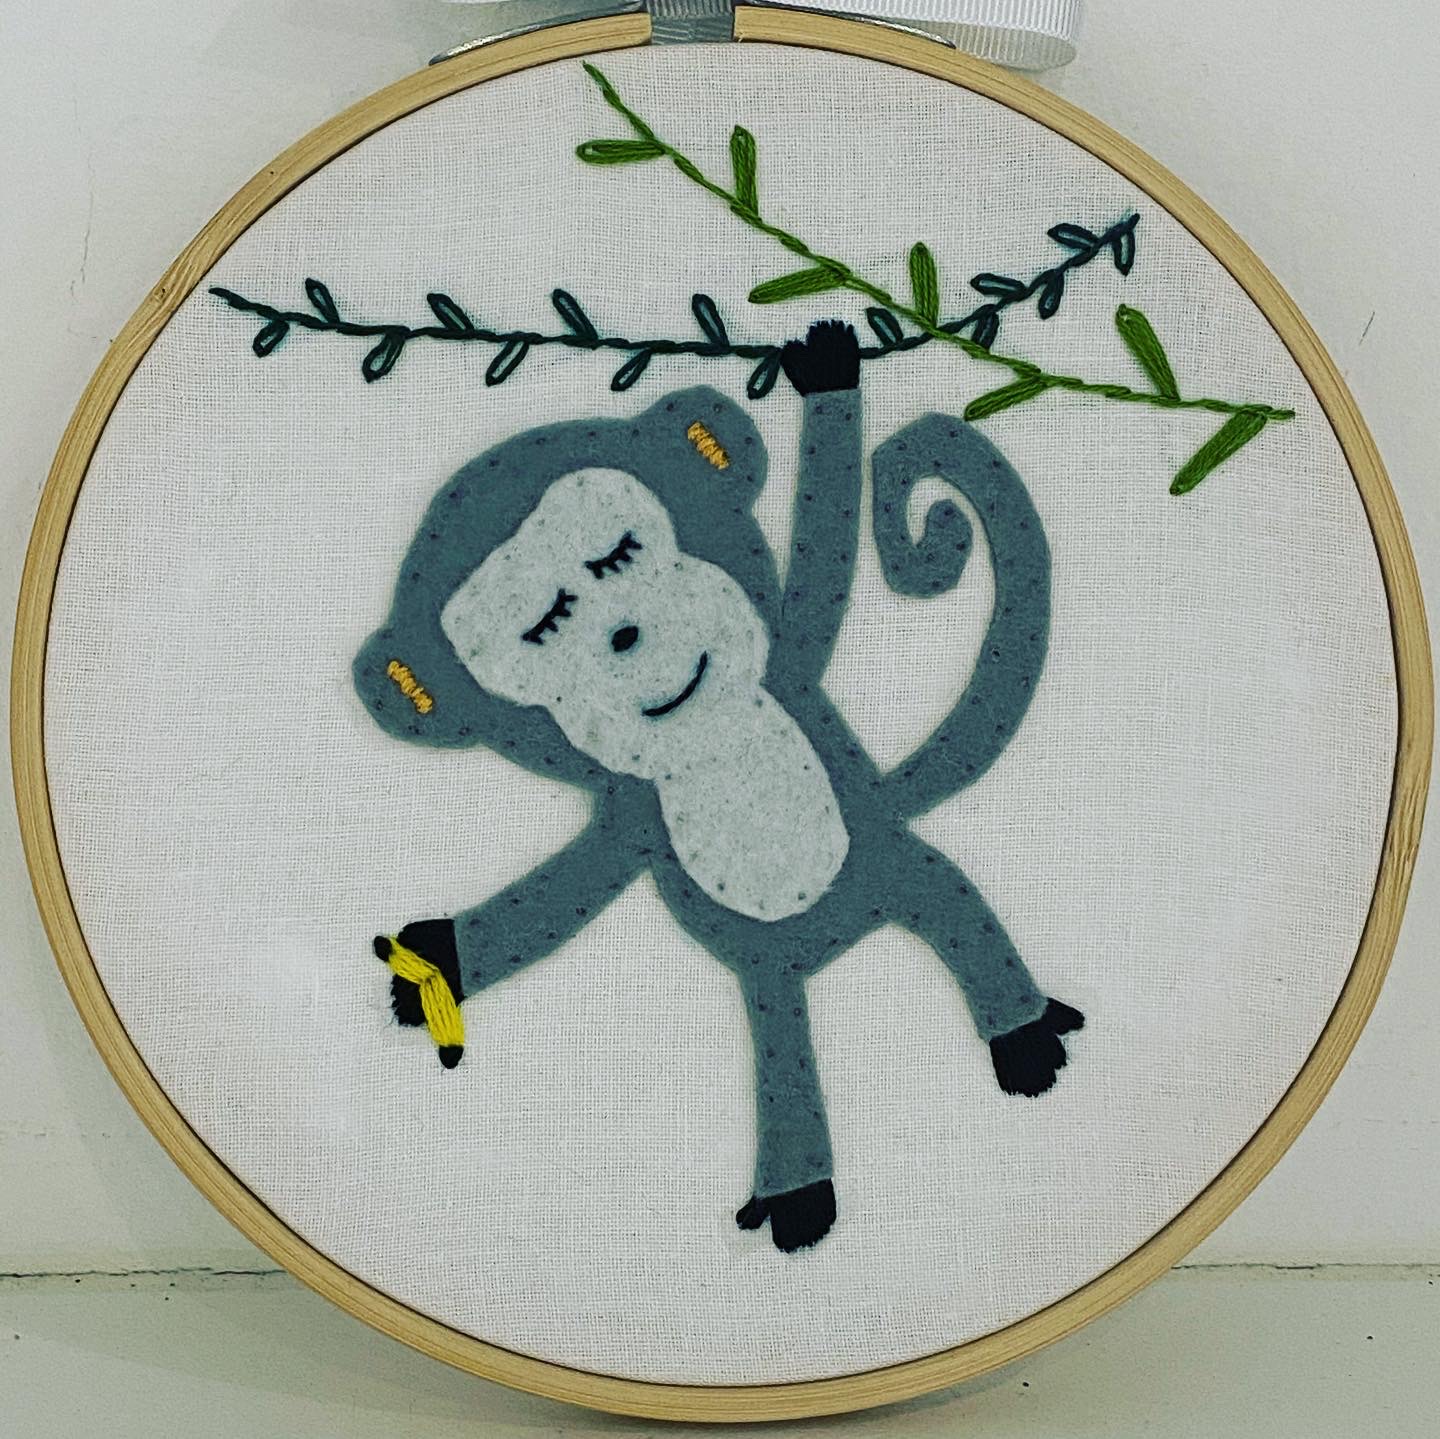 Beginners Maya the Monkey embroidery Kit for Adults & Kids - Treasure Kave